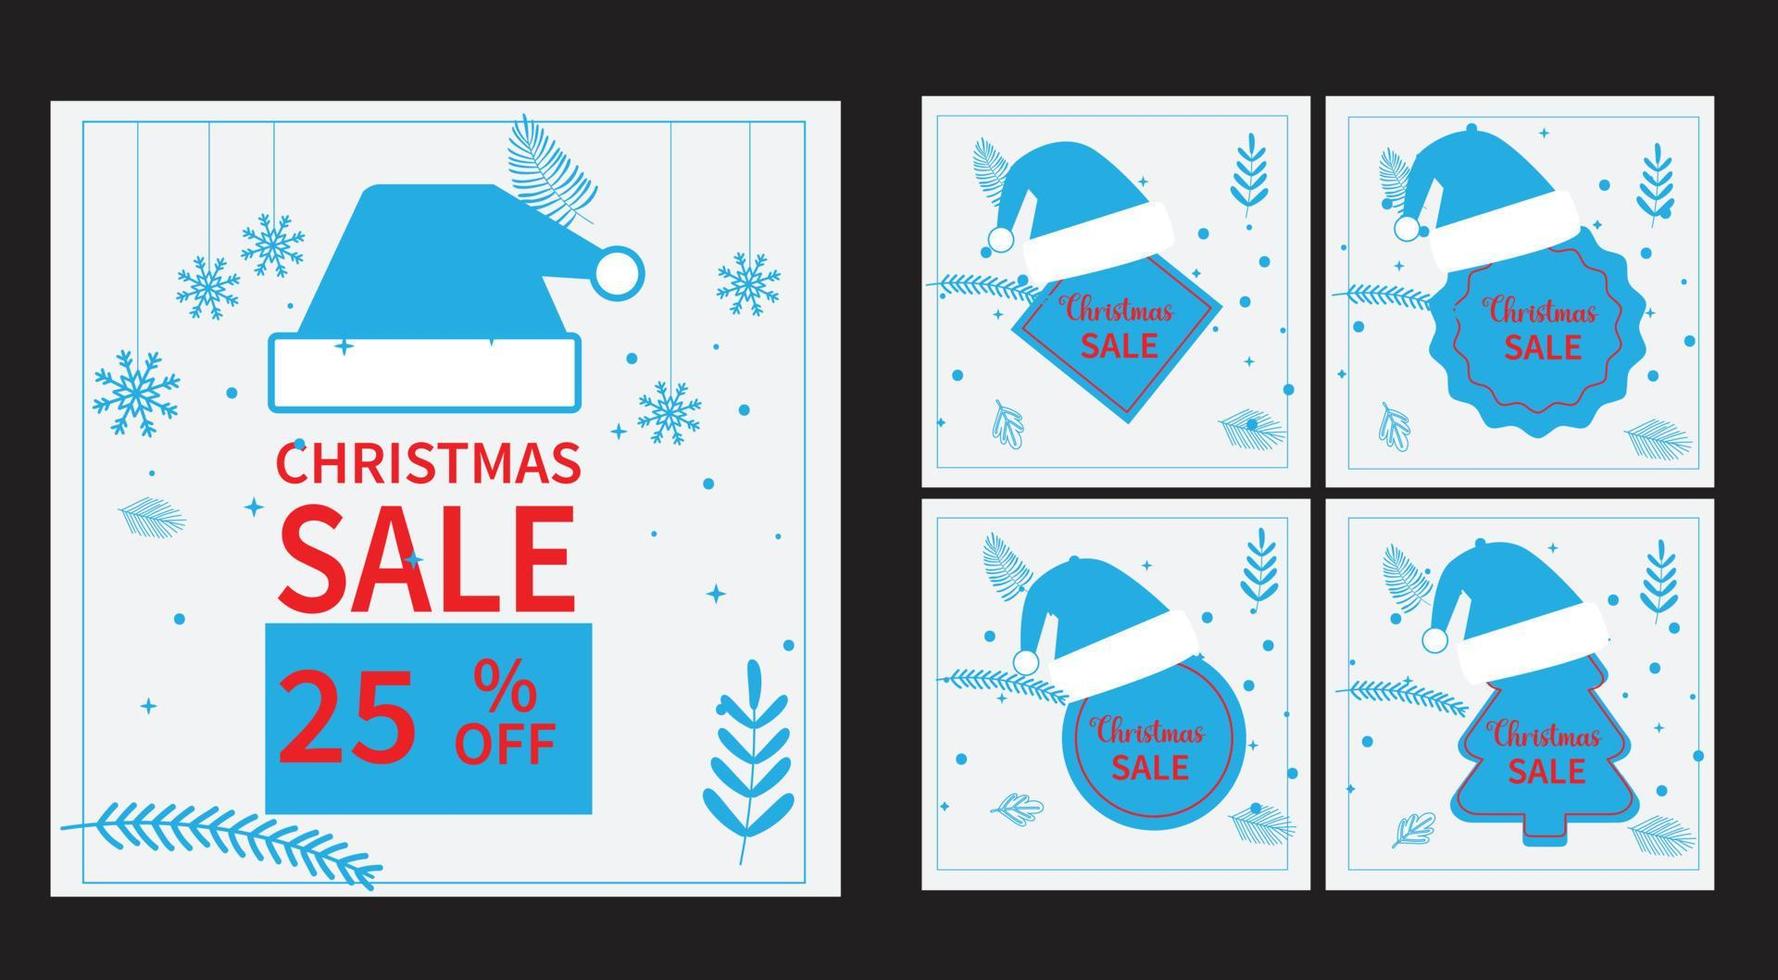 Christmas day sale template design vector